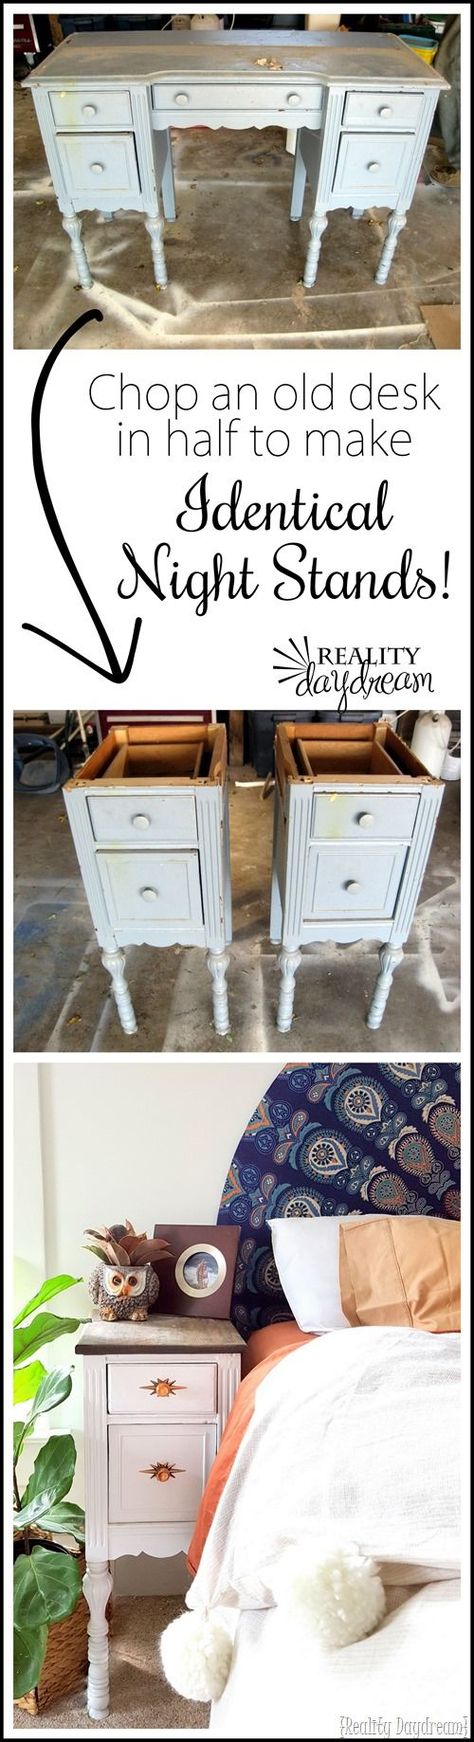 Take apart an old desk to make two unique and IDENTICAL night stands! Finally a bedside table that's the perfect height! {Reality Daydream} Furniture Makeover, Repurposed Furniture, Upcycled Furniture, Diy Furniture, Diy Furniture Makeover Ideas, Furniture Makeover Diy, Repurposed Items, Furniture Diy, Old Desks